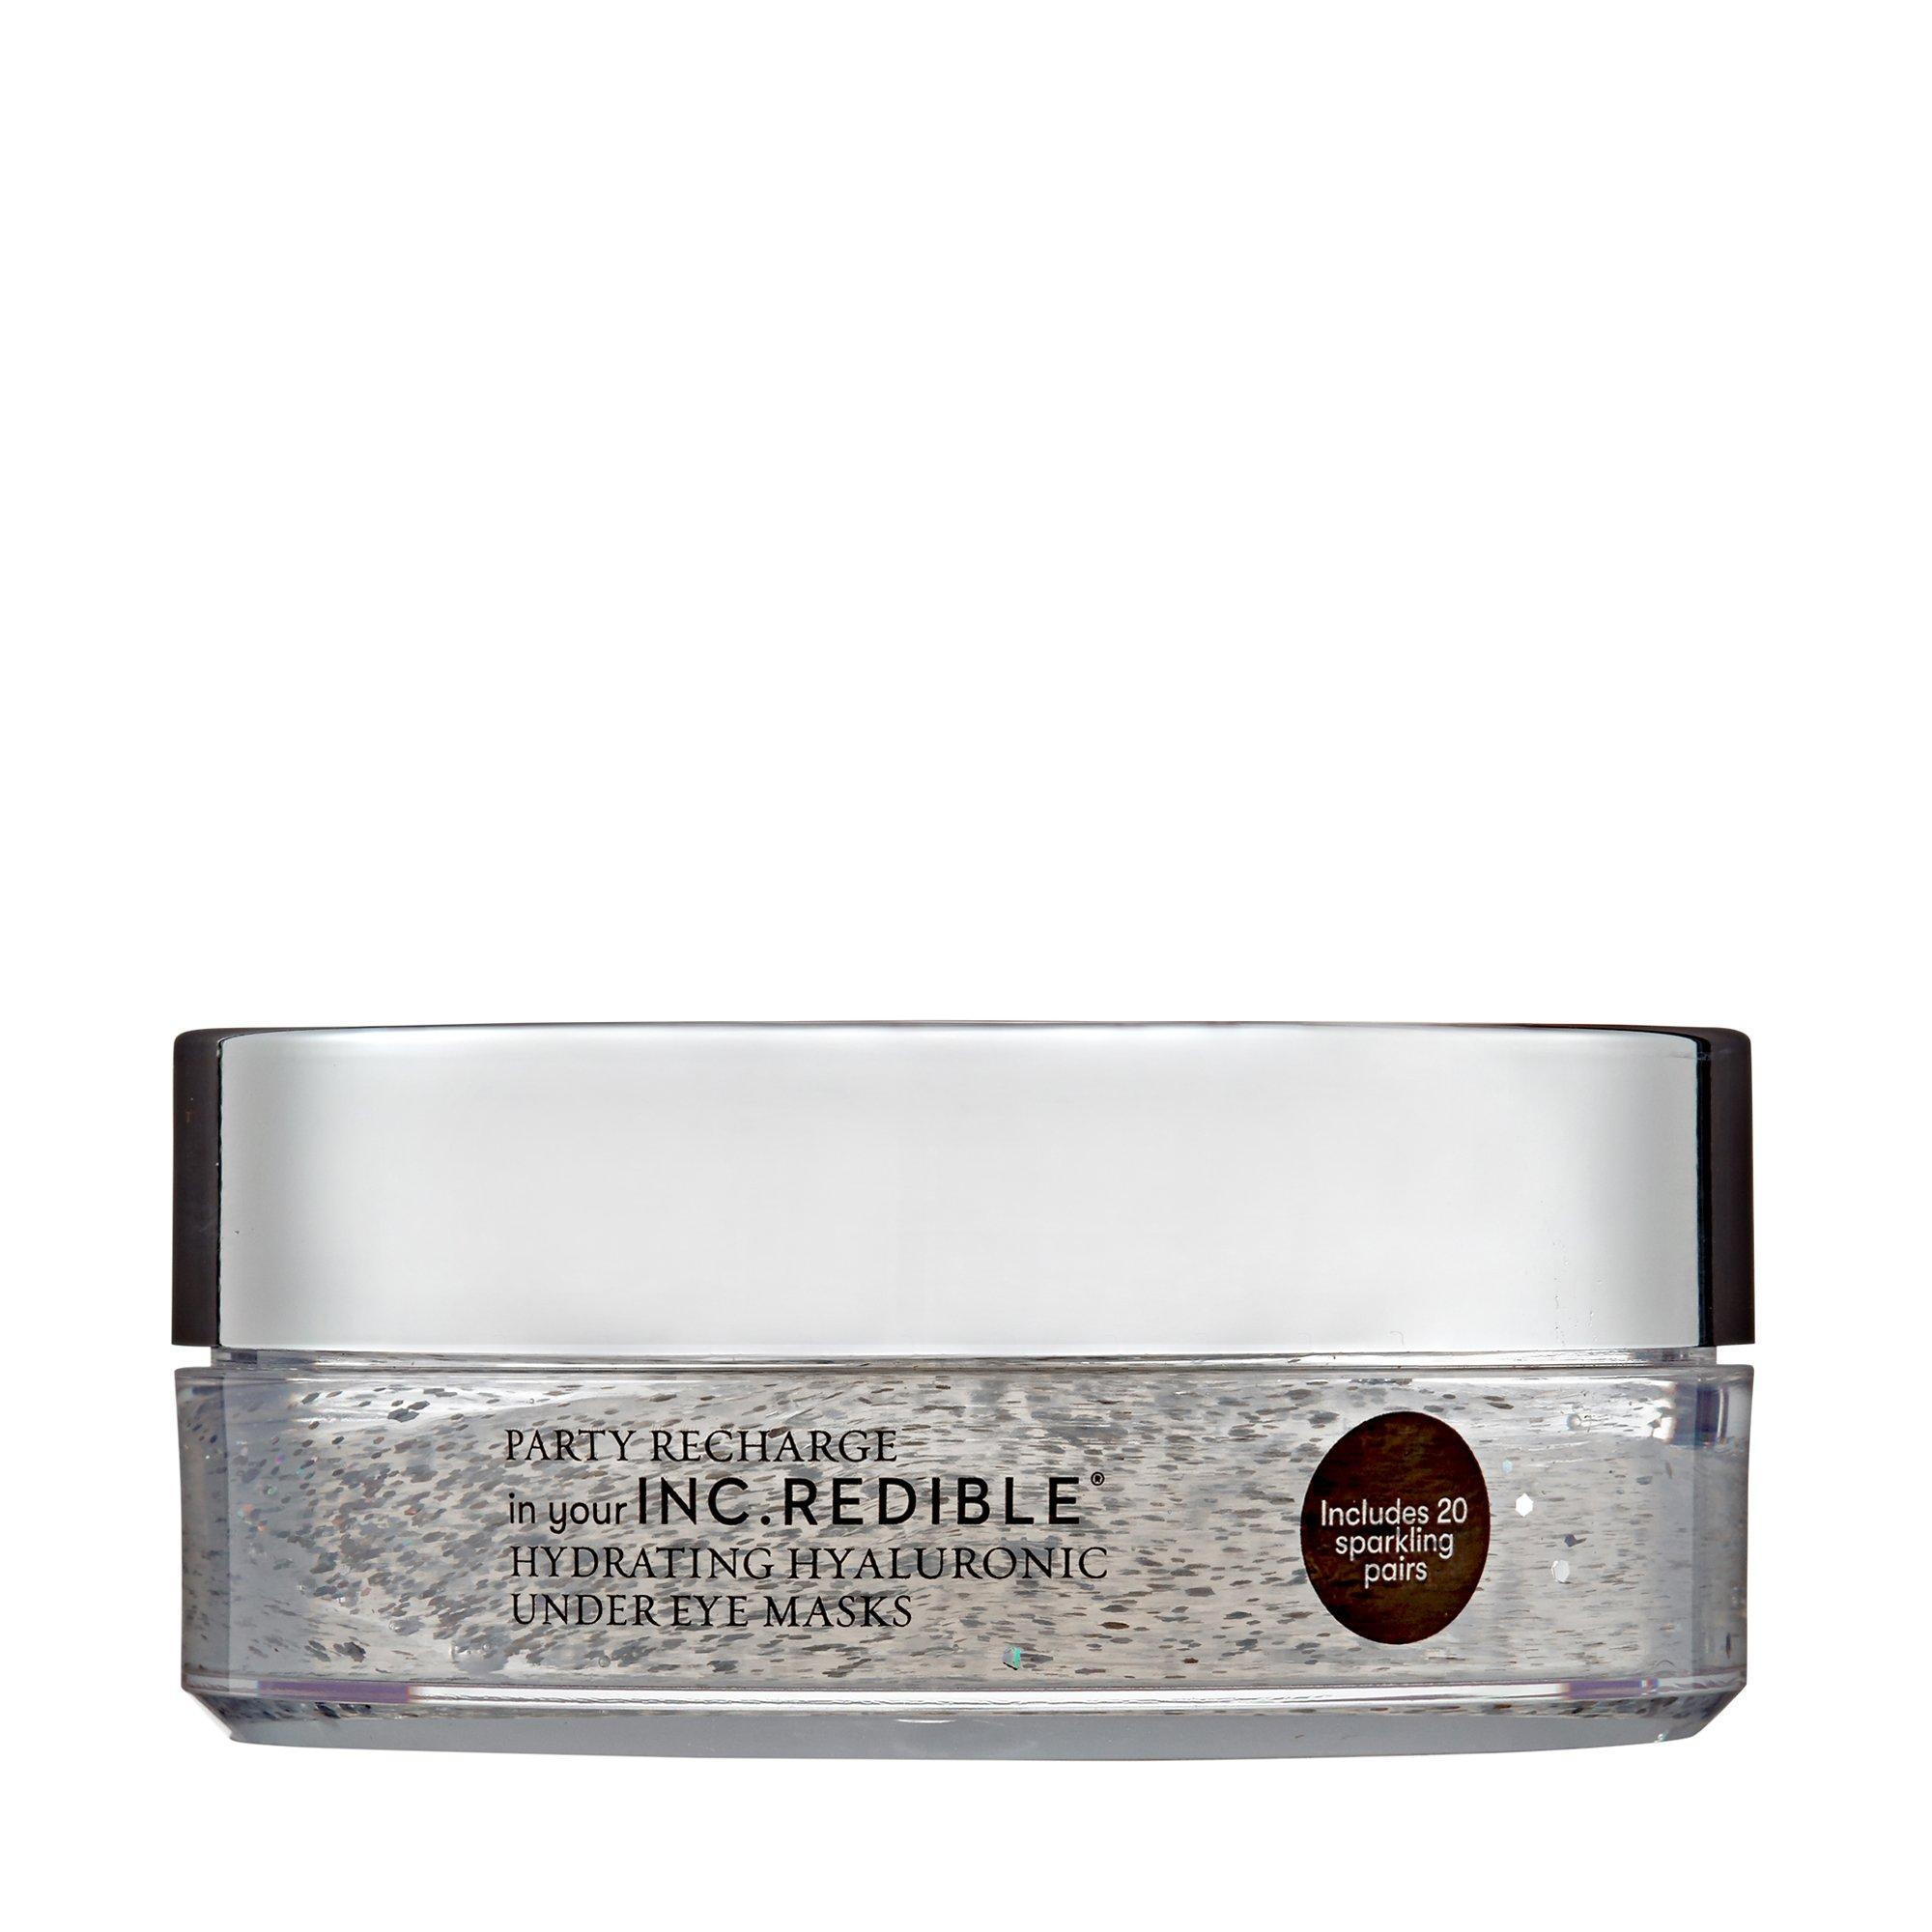 Image of Inc.redible Sparkling Under Eye Masks - Party Recharge